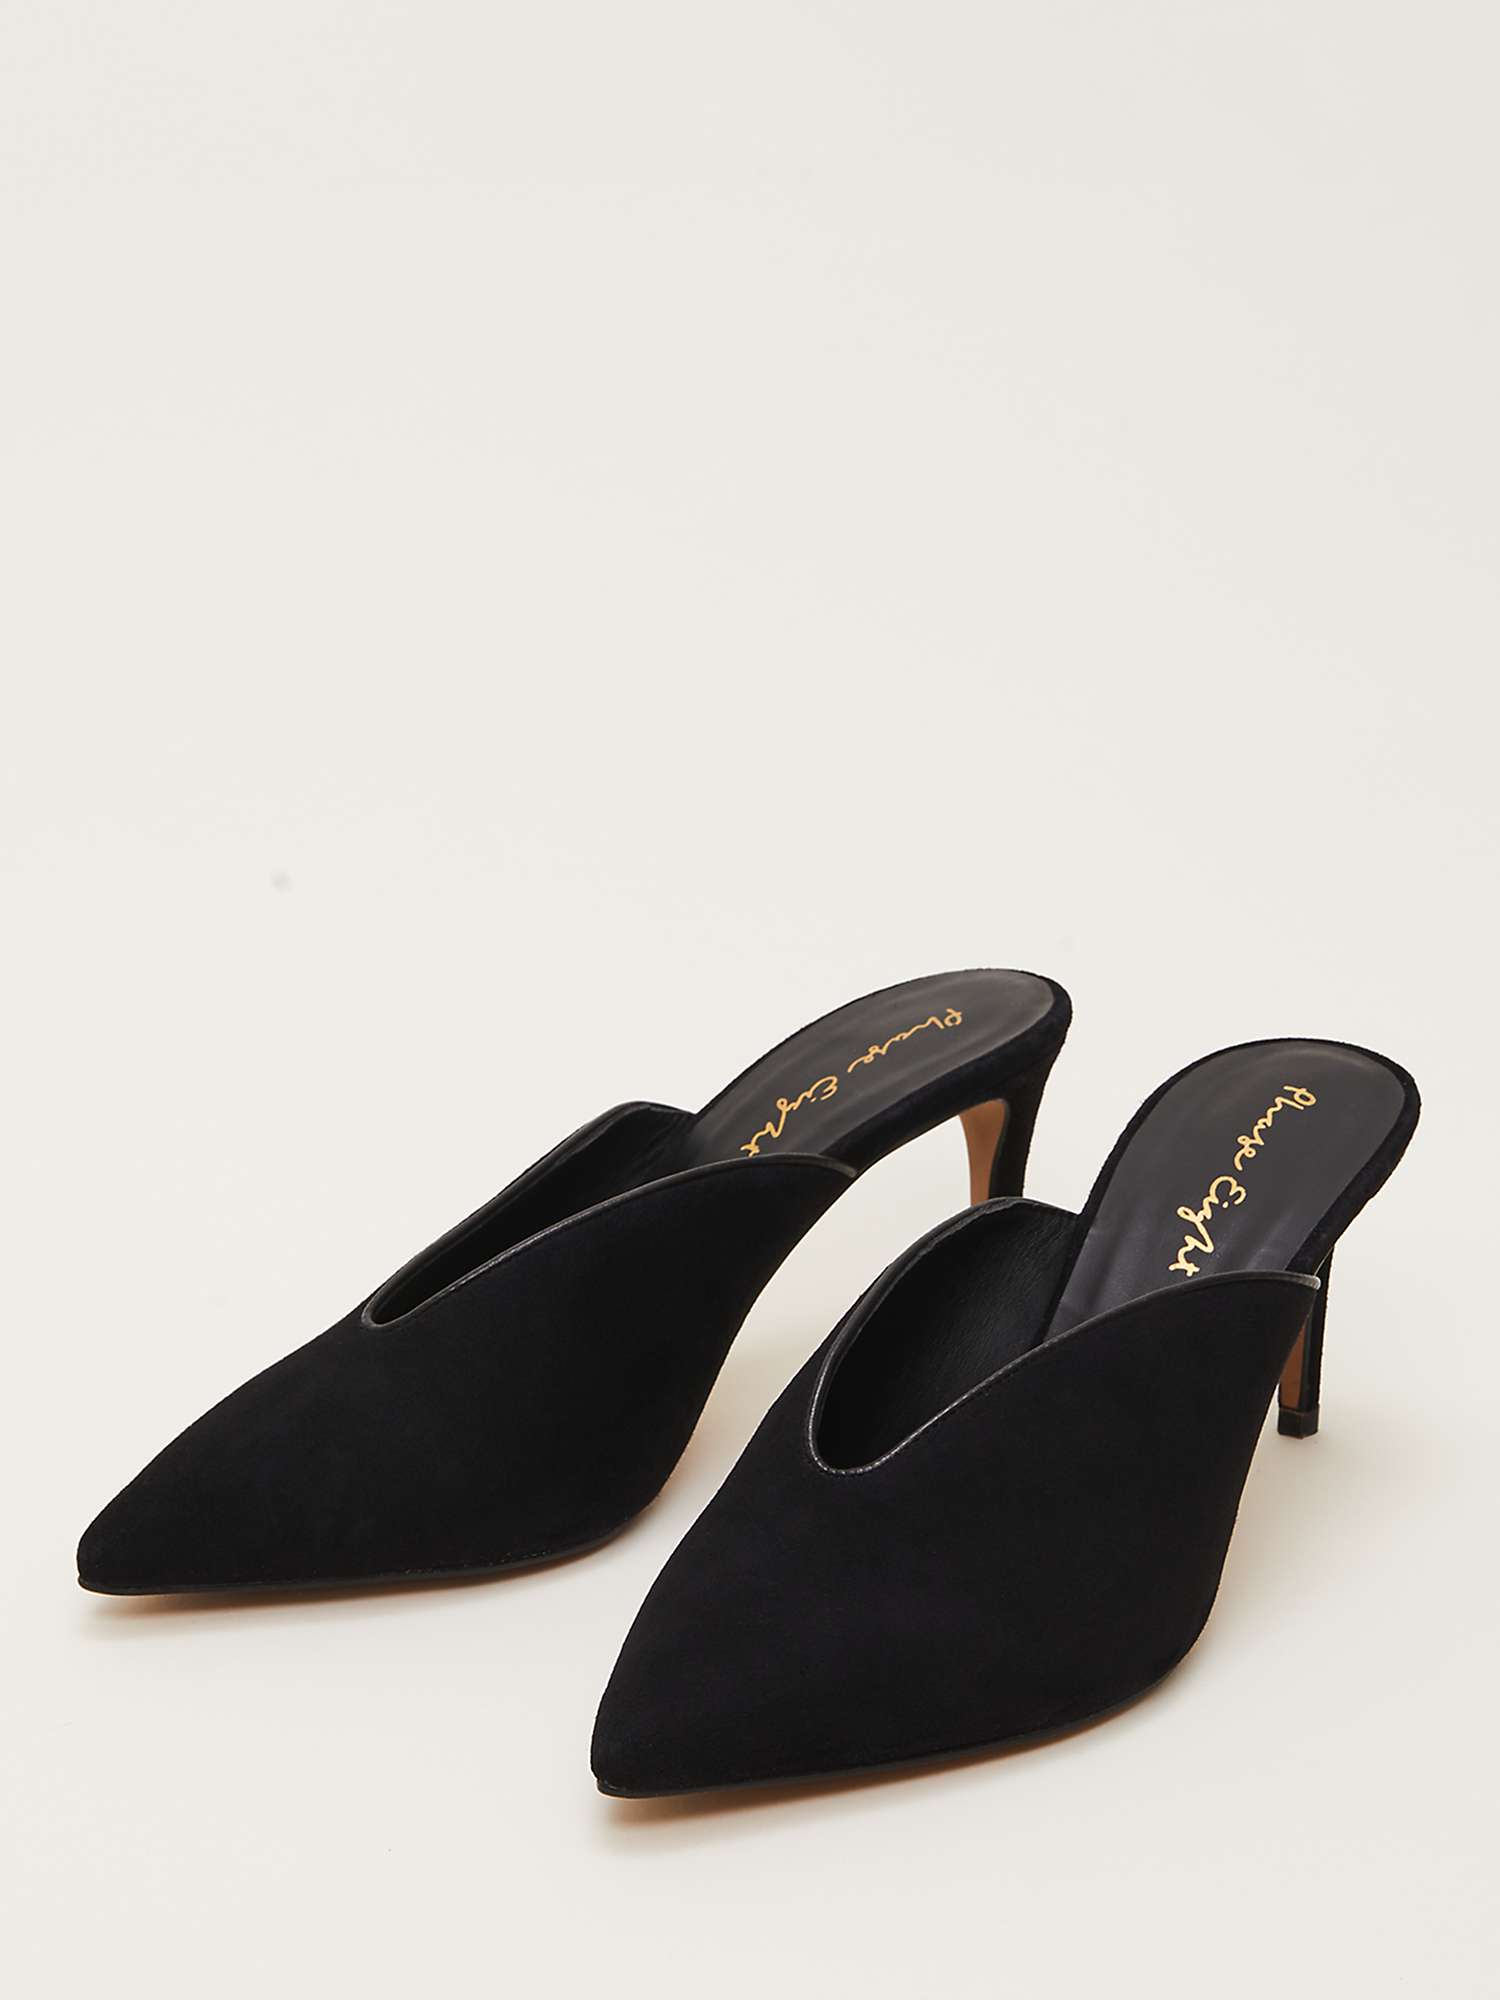 Phase Eight V Front High Heel Suede Shoes, Black at John Lewis & Partners